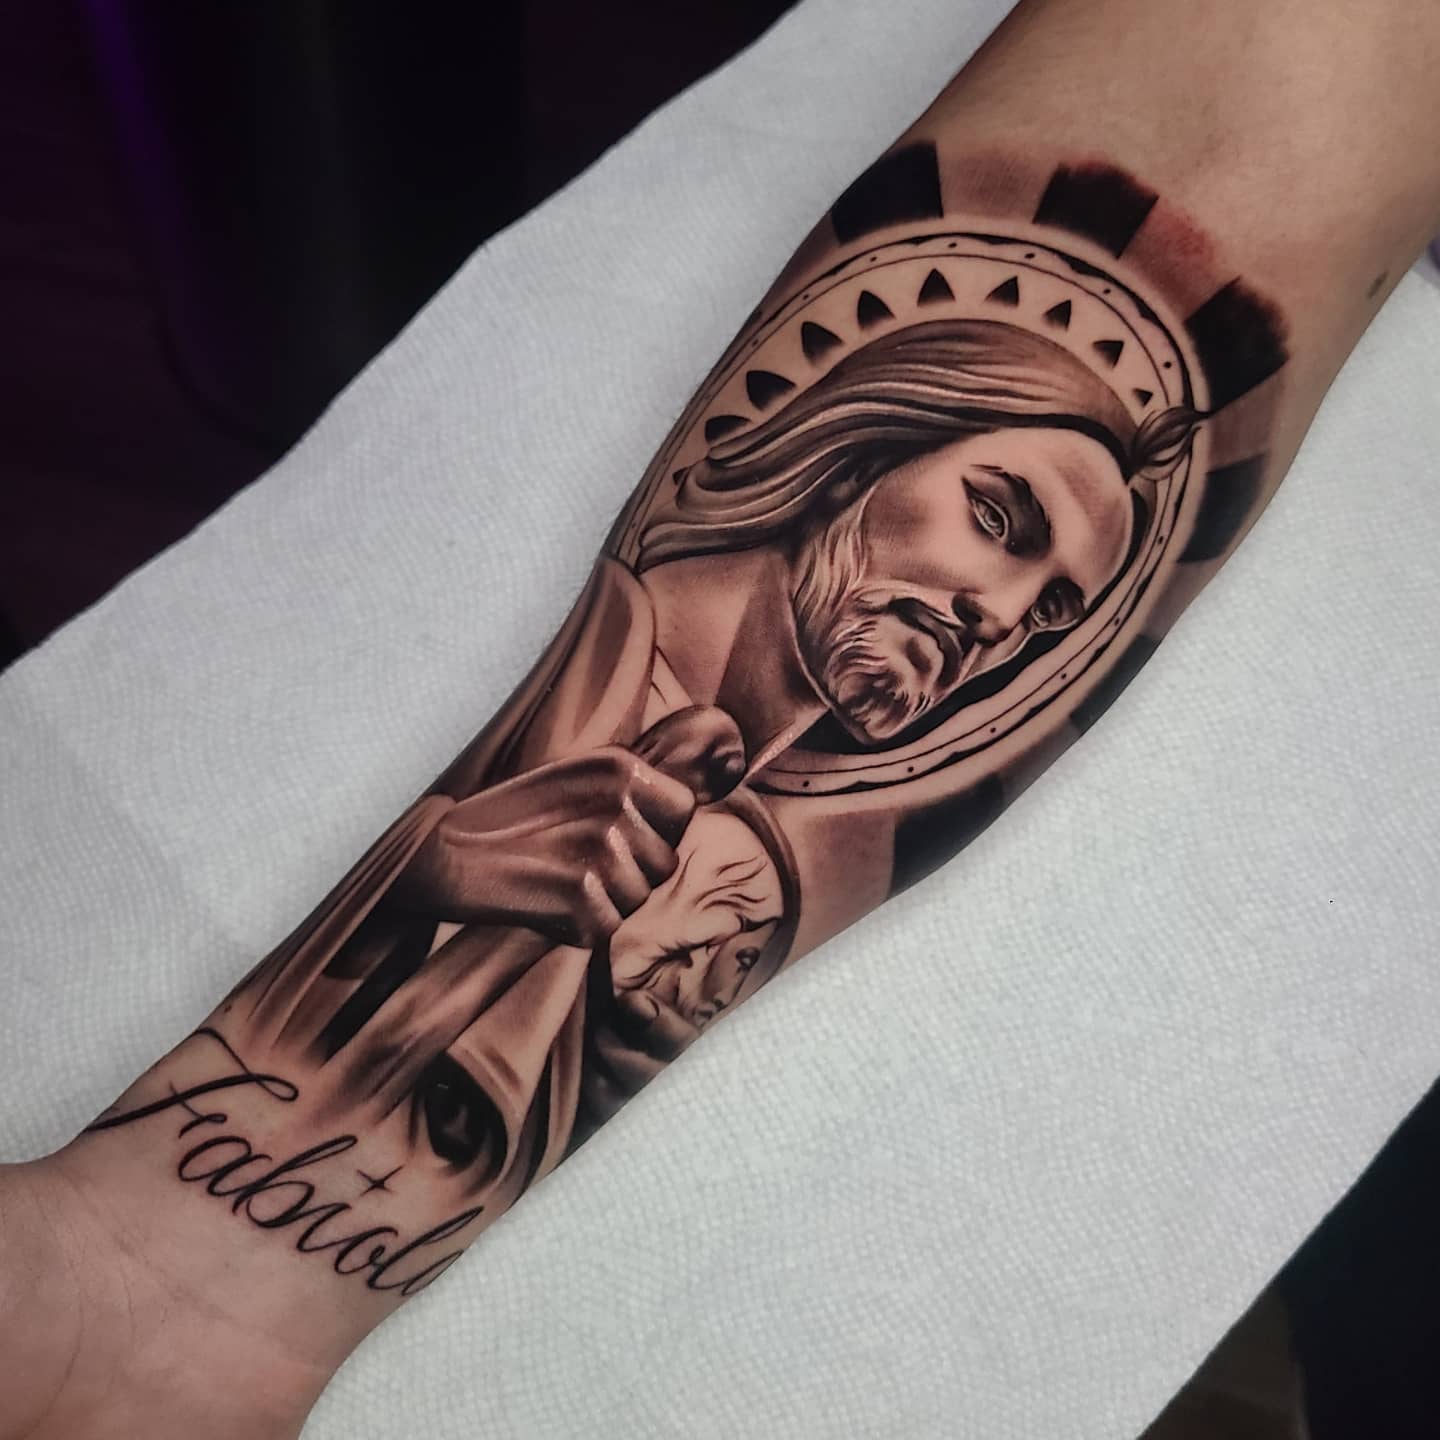 Quick video of this San Judas done in Tijuana at my boys  roach107exclusiveinkclub shop thanks again for the hospitality  By  TattooRandy Aguilar  Facebook